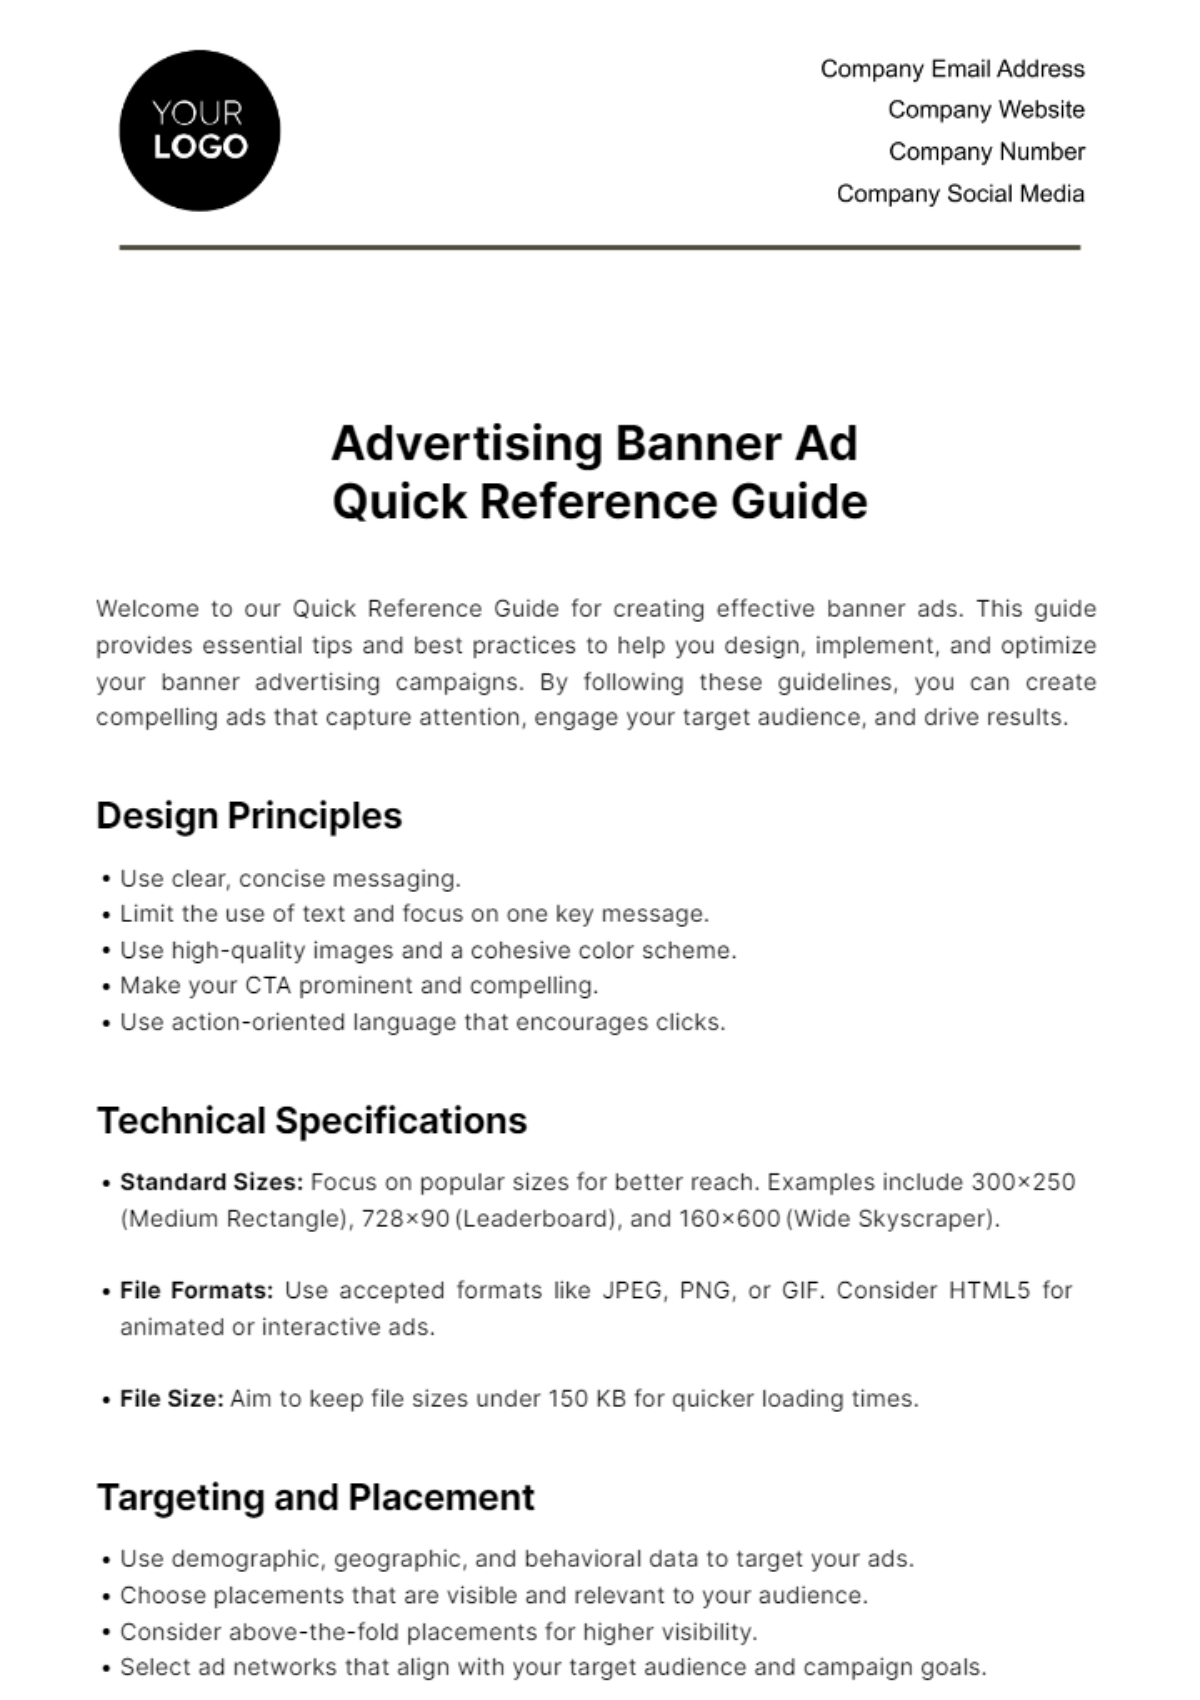 Free Advertising Banner Ad Quick Reference Guide Template